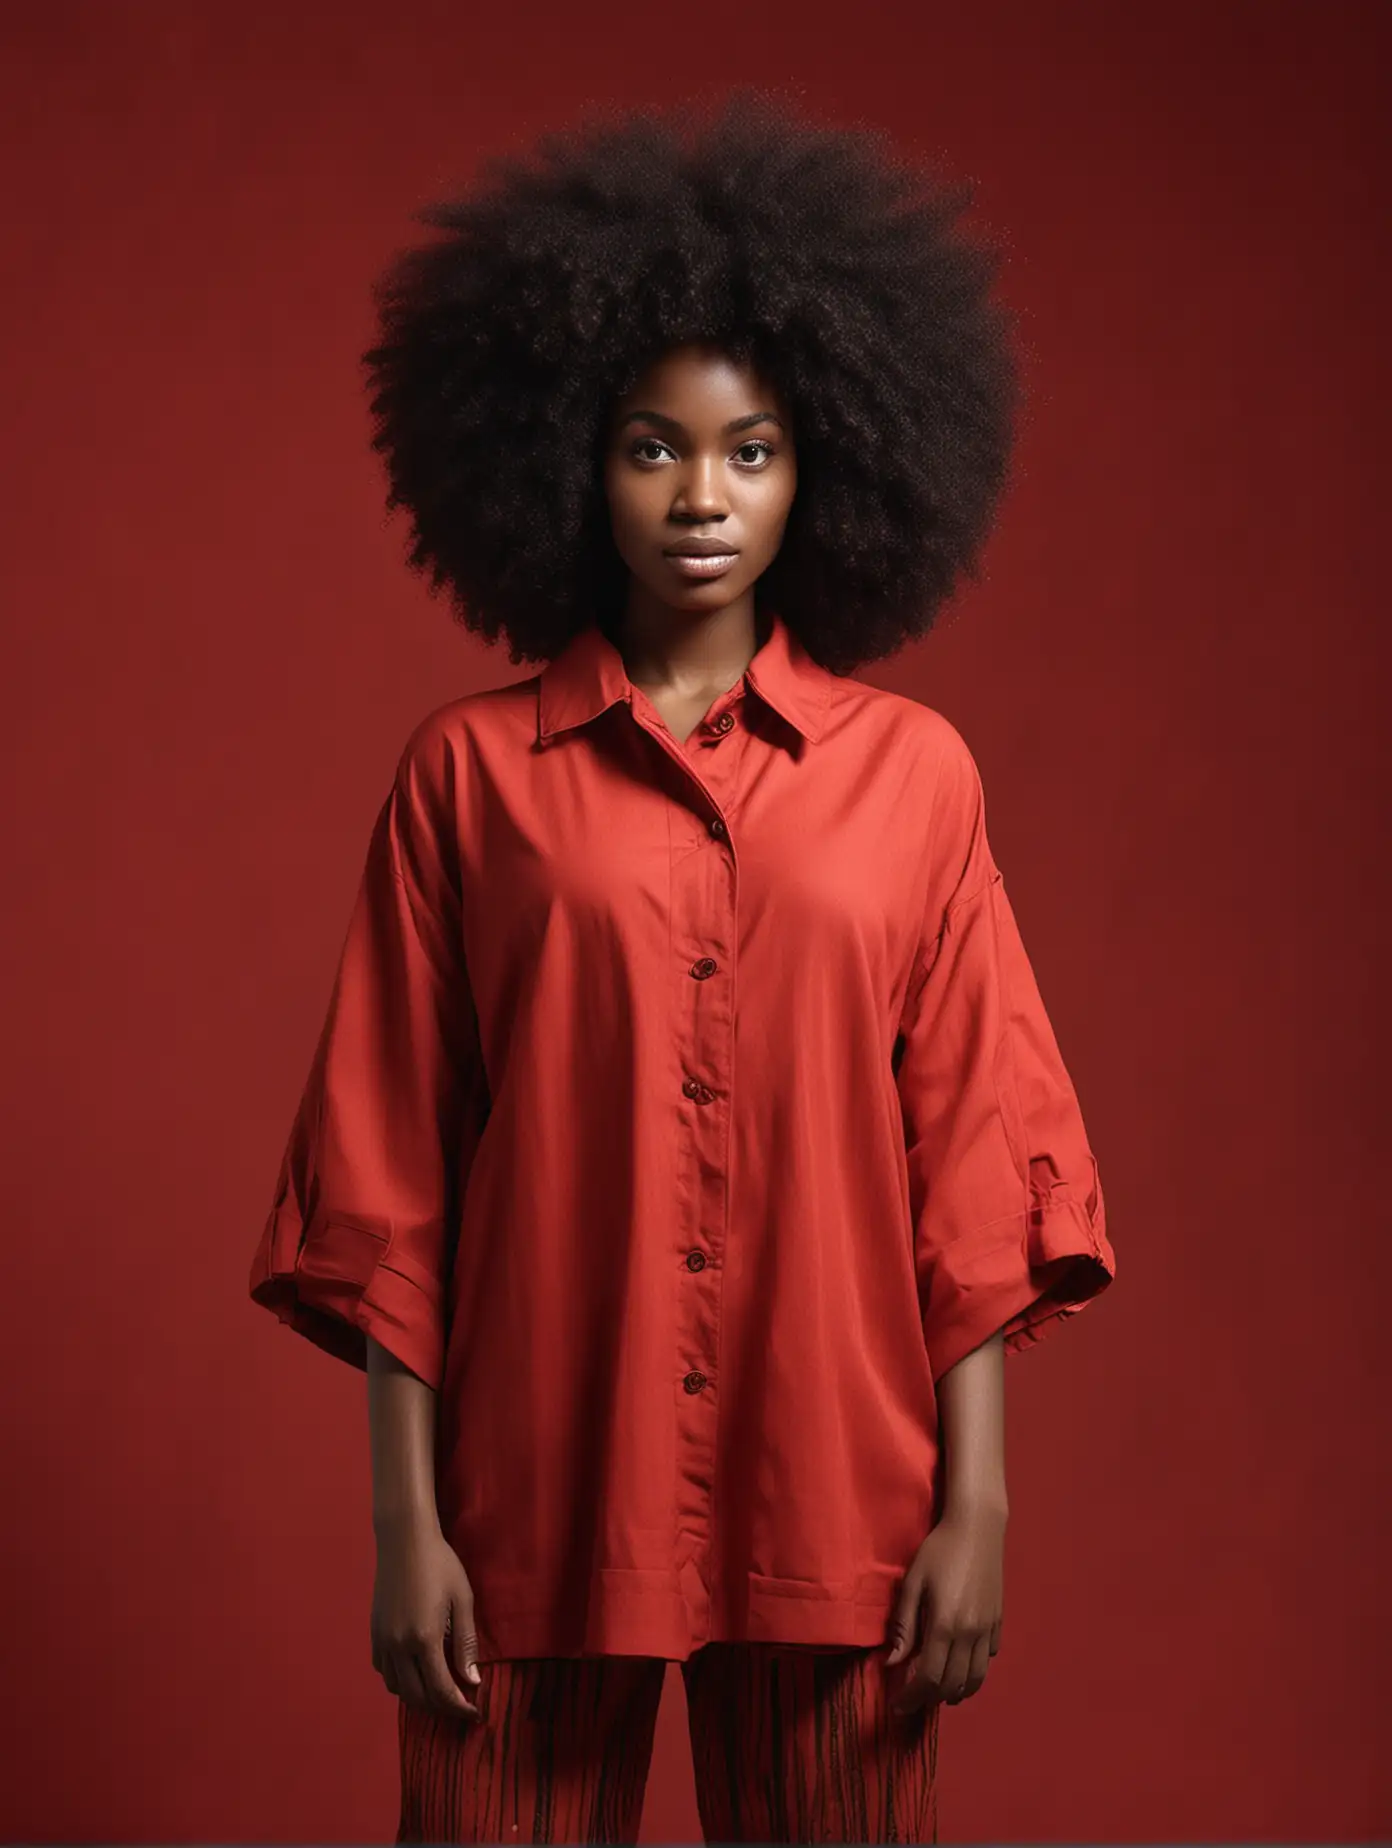 dark female model with tall african hair, in a red photo studio, model is wearing oversized clothes from year 3000, ultra realistic photo, v6, cinematic light, add more space around model, model is posing funny and wild like in the 60s